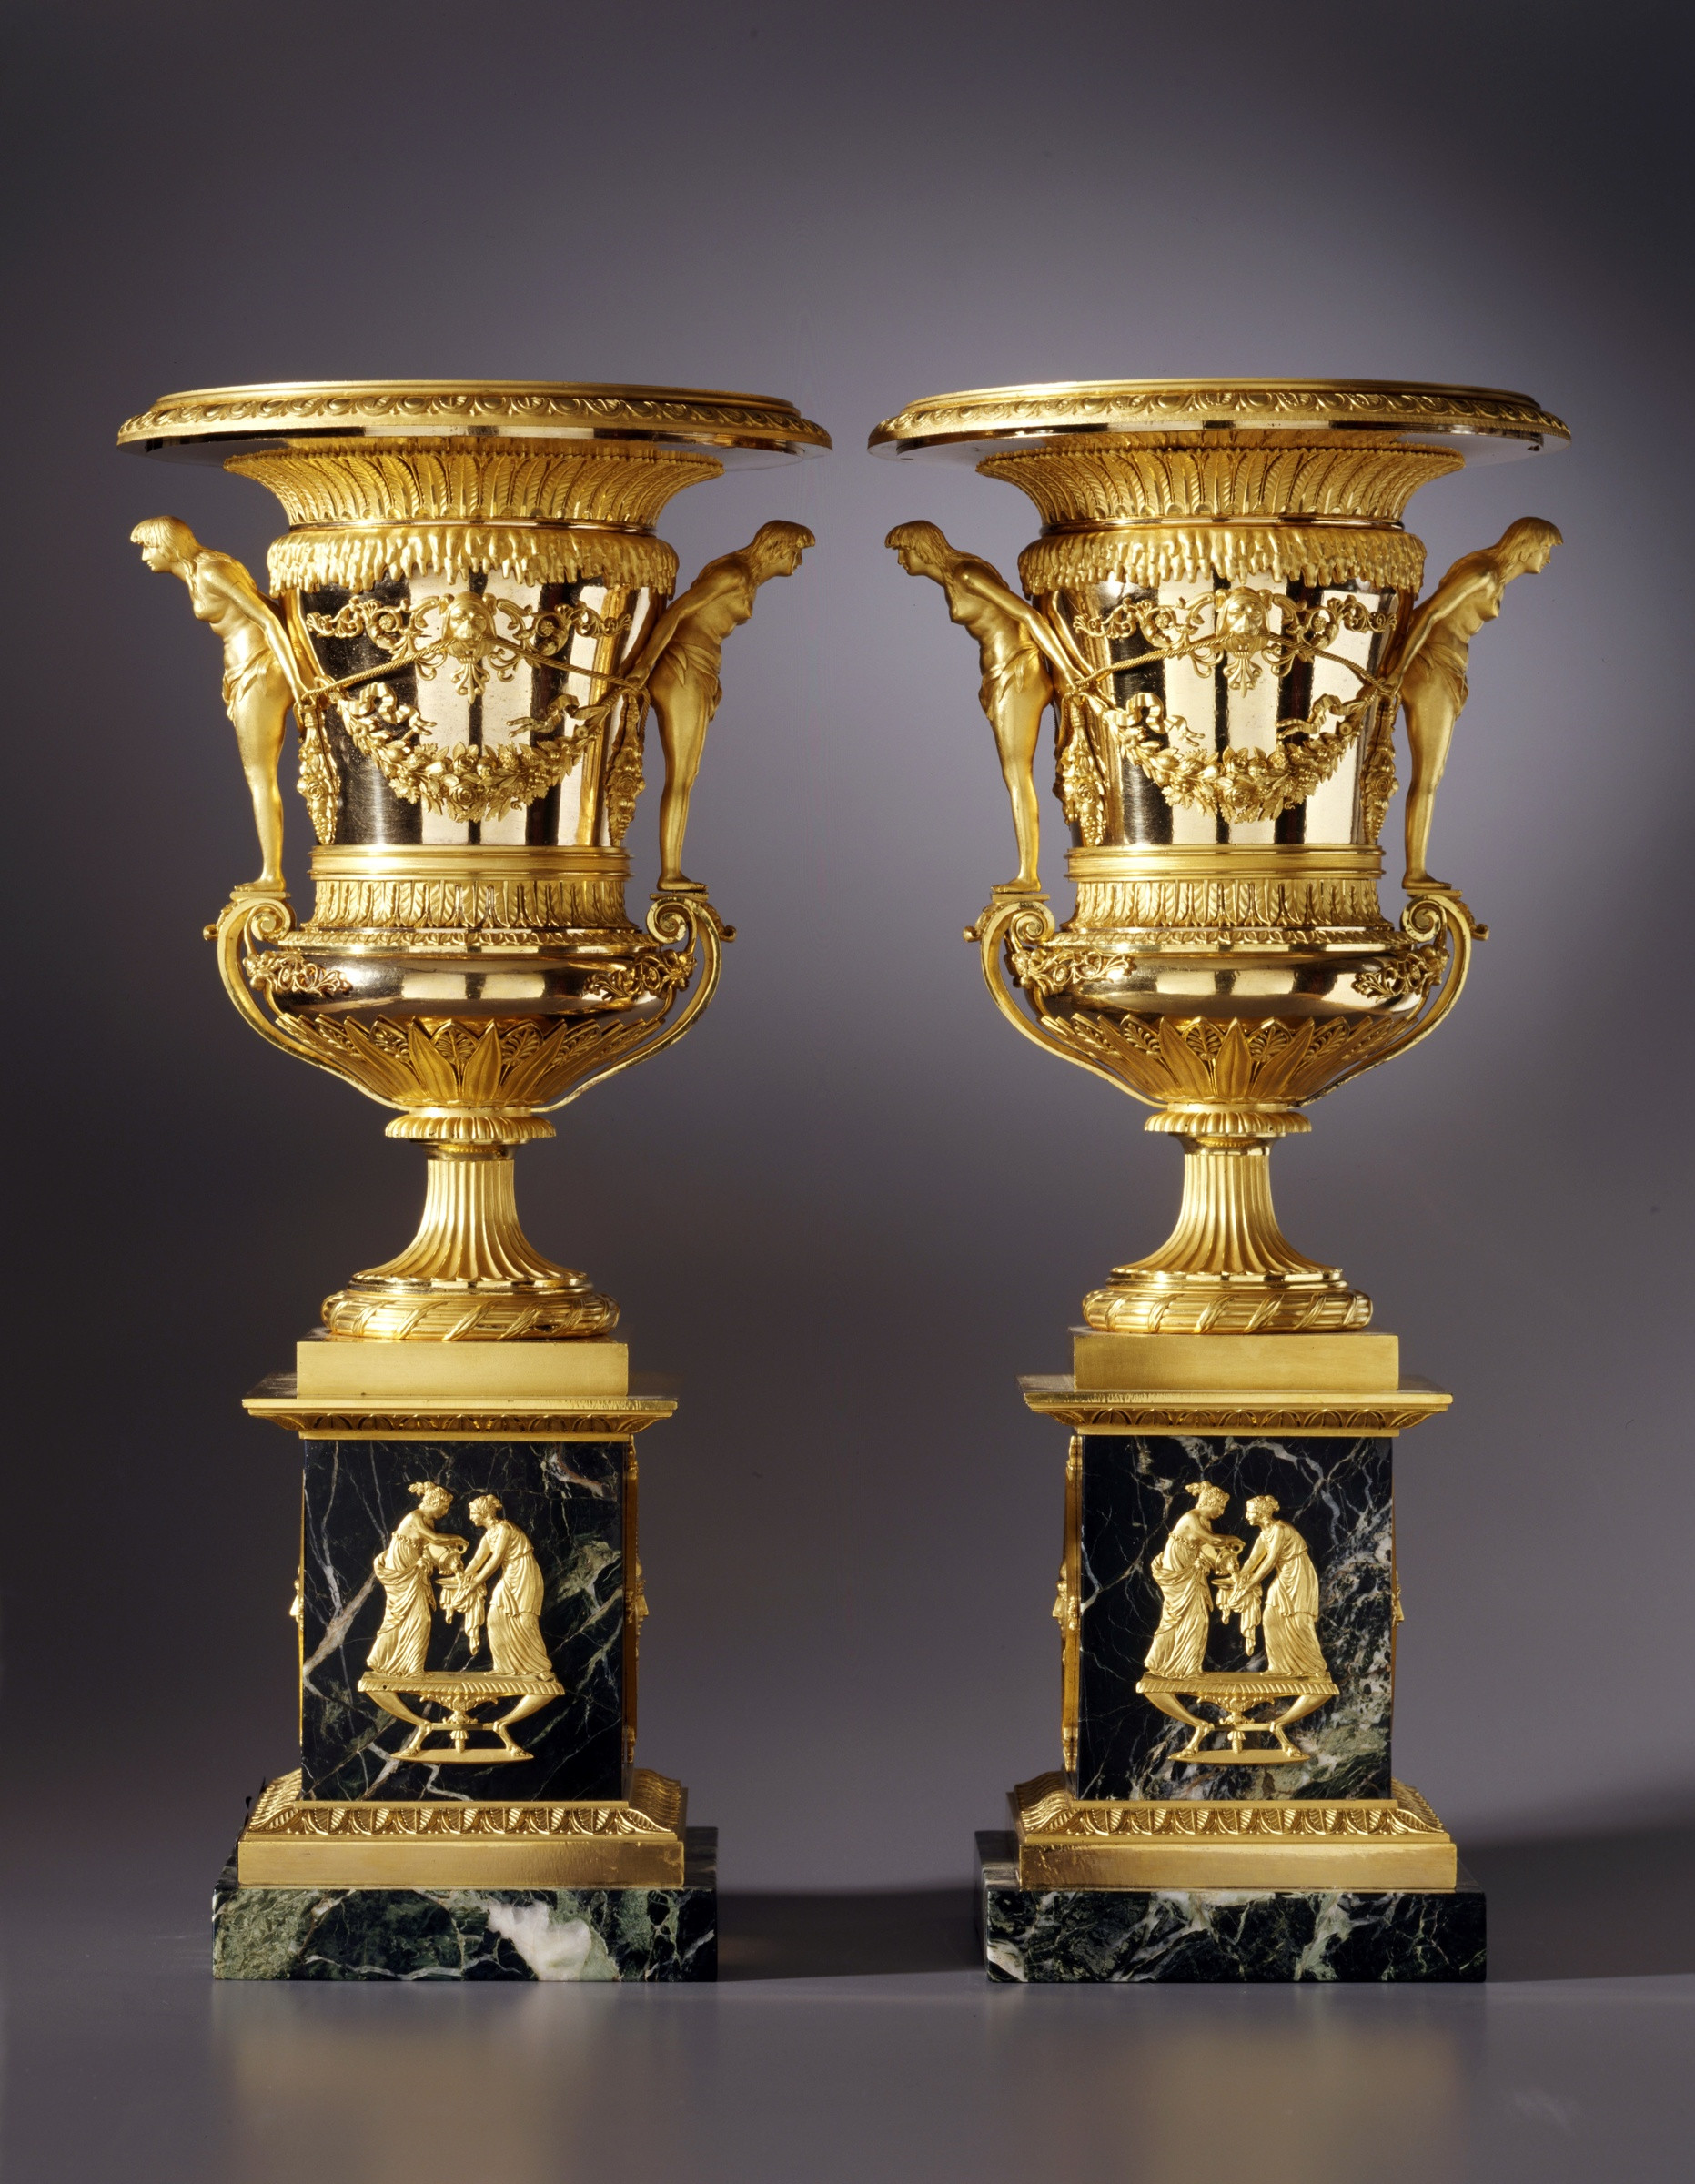 11 Lovely Pedestal Bowl Vase 2024 free download pedestal bowl vase of friedrich bergenfeldt attributed to a pair of large sized st in a pair of large sized st petersburg empire vases attributed to friedrich bergenfeldt